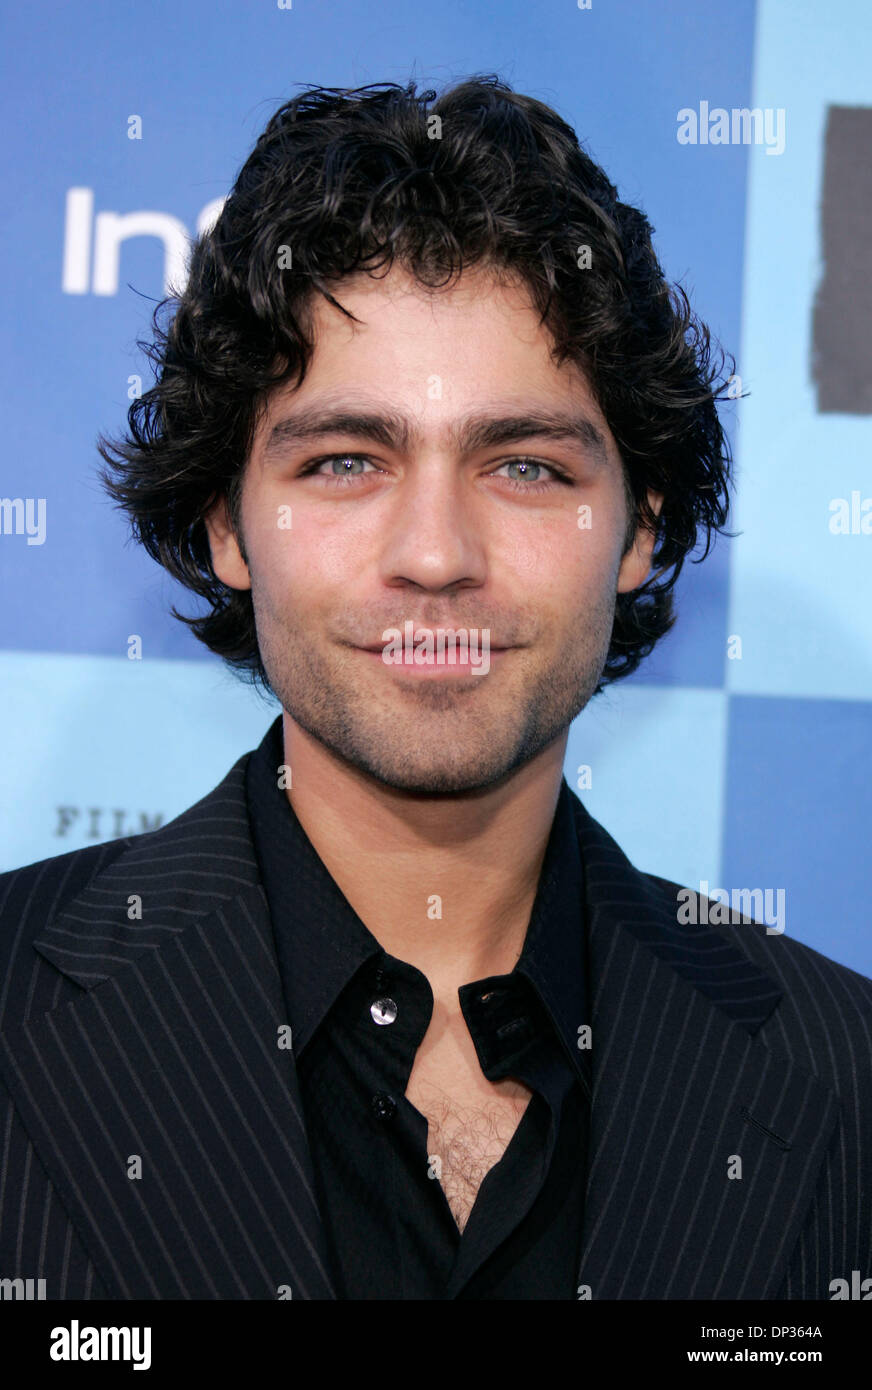 Jun 22, 2006; Westwood, California, USA; Actor ADRIAN GRENIER at 'The Devil  Wears Prada' Los Angeles Premiere, which opens the Los Angeles Film  Festival held at the Mann Village Theatre. Mandatory Credit: